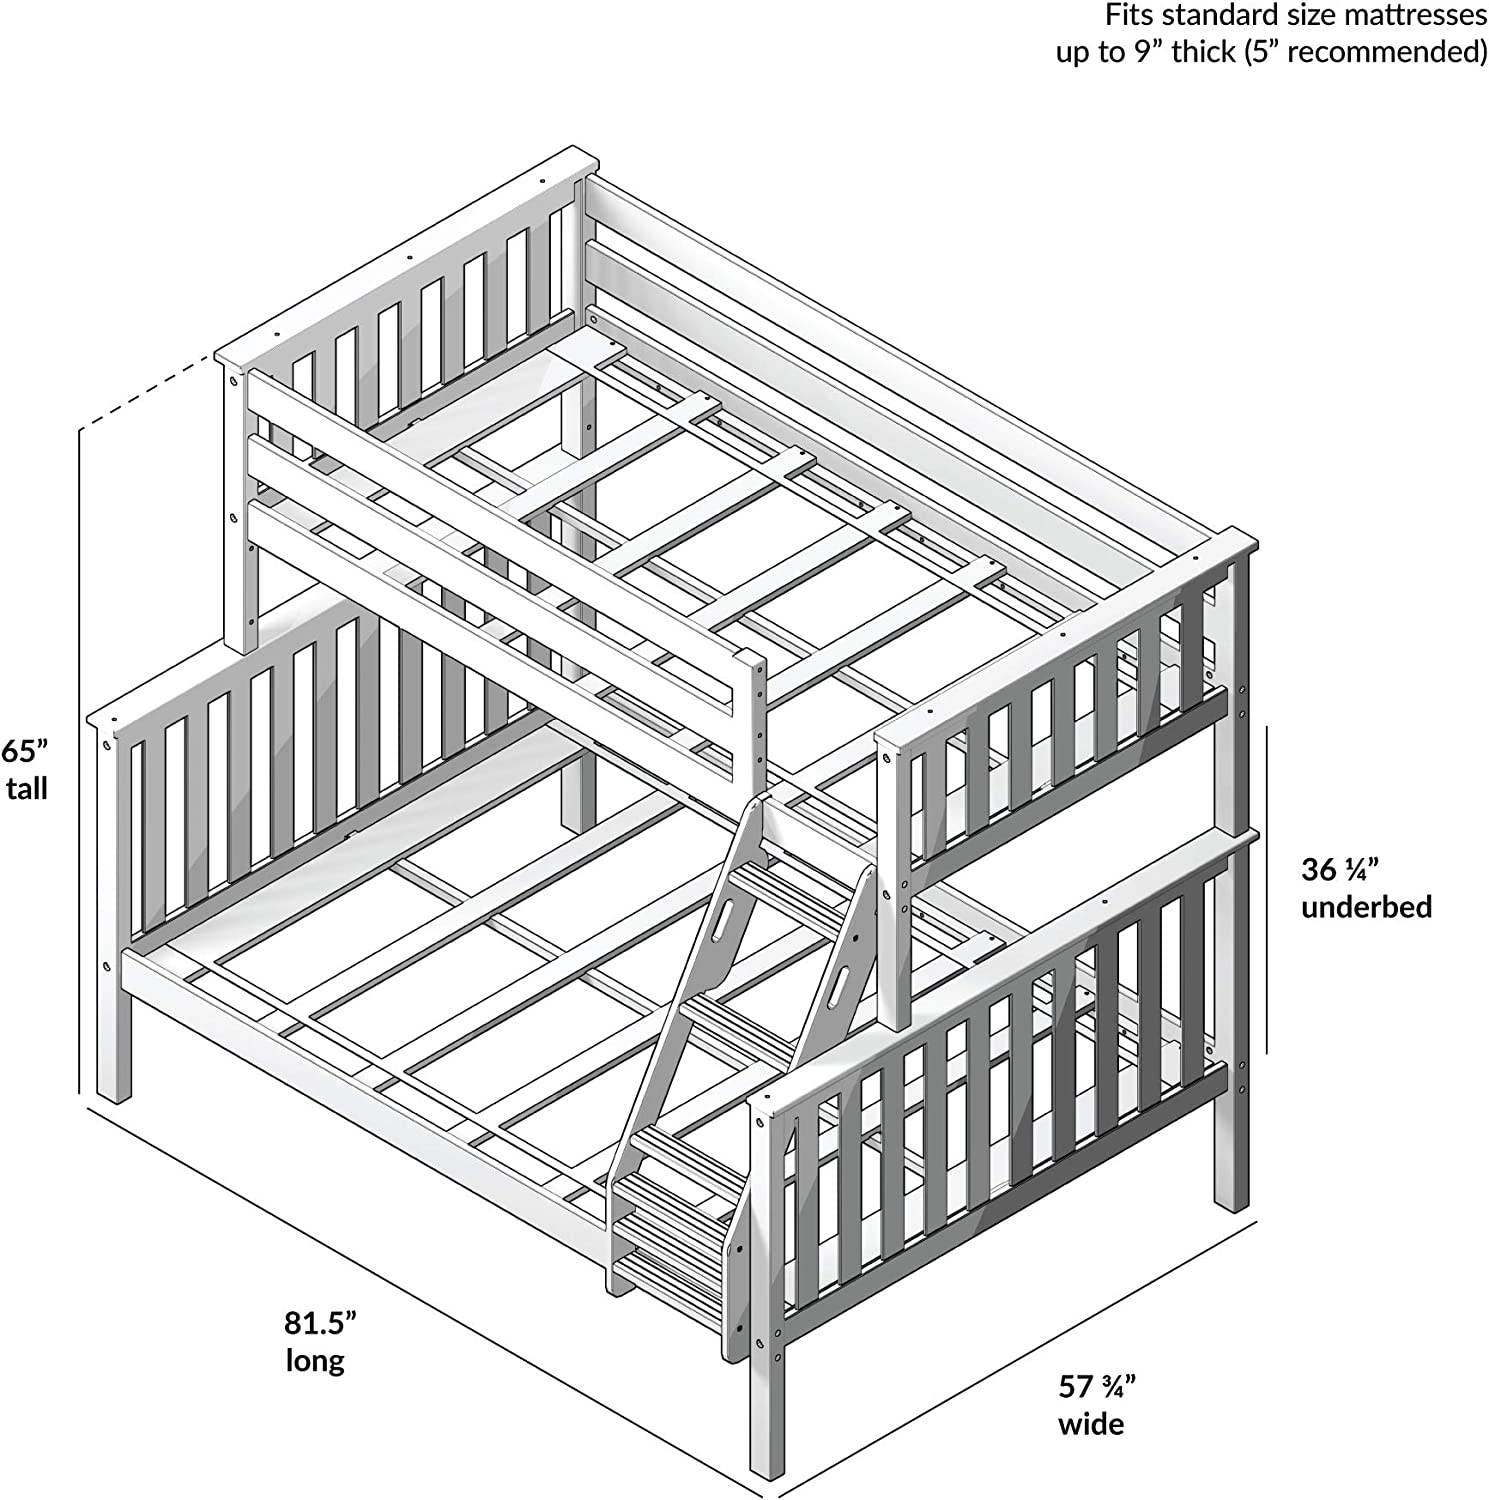 Max & Lily Bunk Bed, Twin-Over-Full Wood Bed Frame For Kids, Espresso - $345